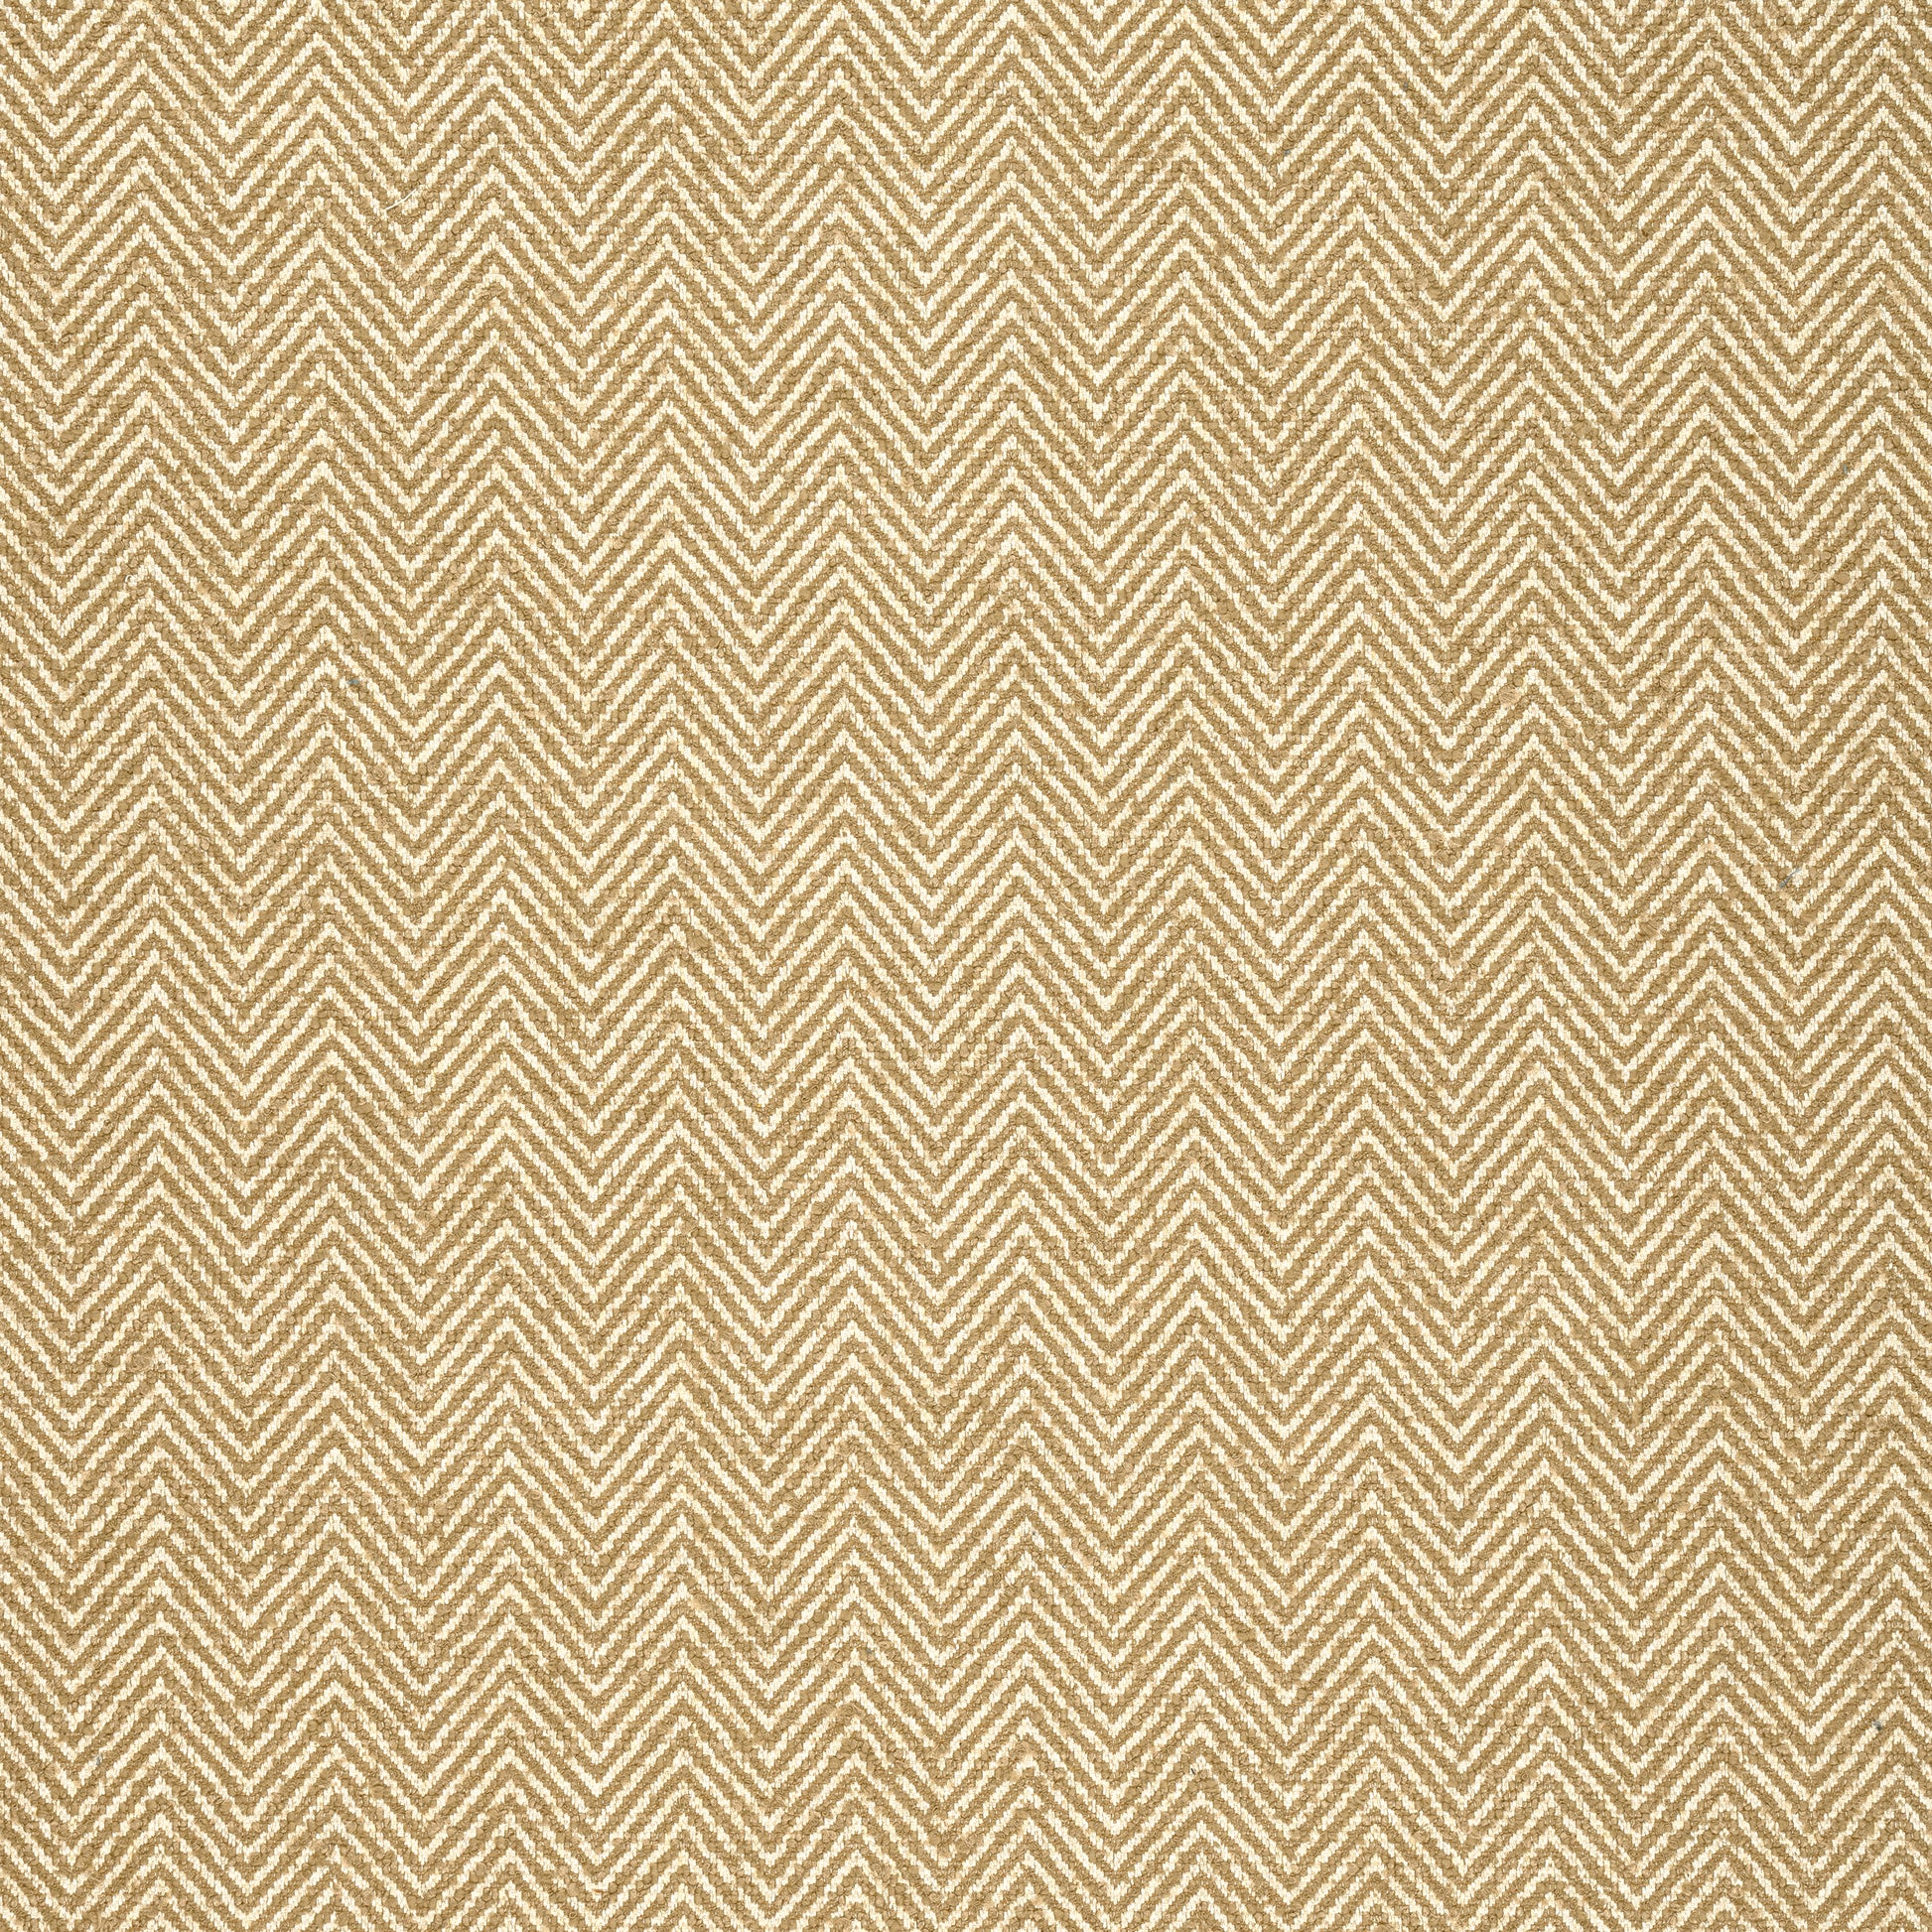 Purchase Thibaut Fabric Item W77126 pattern name Monviso color Camel